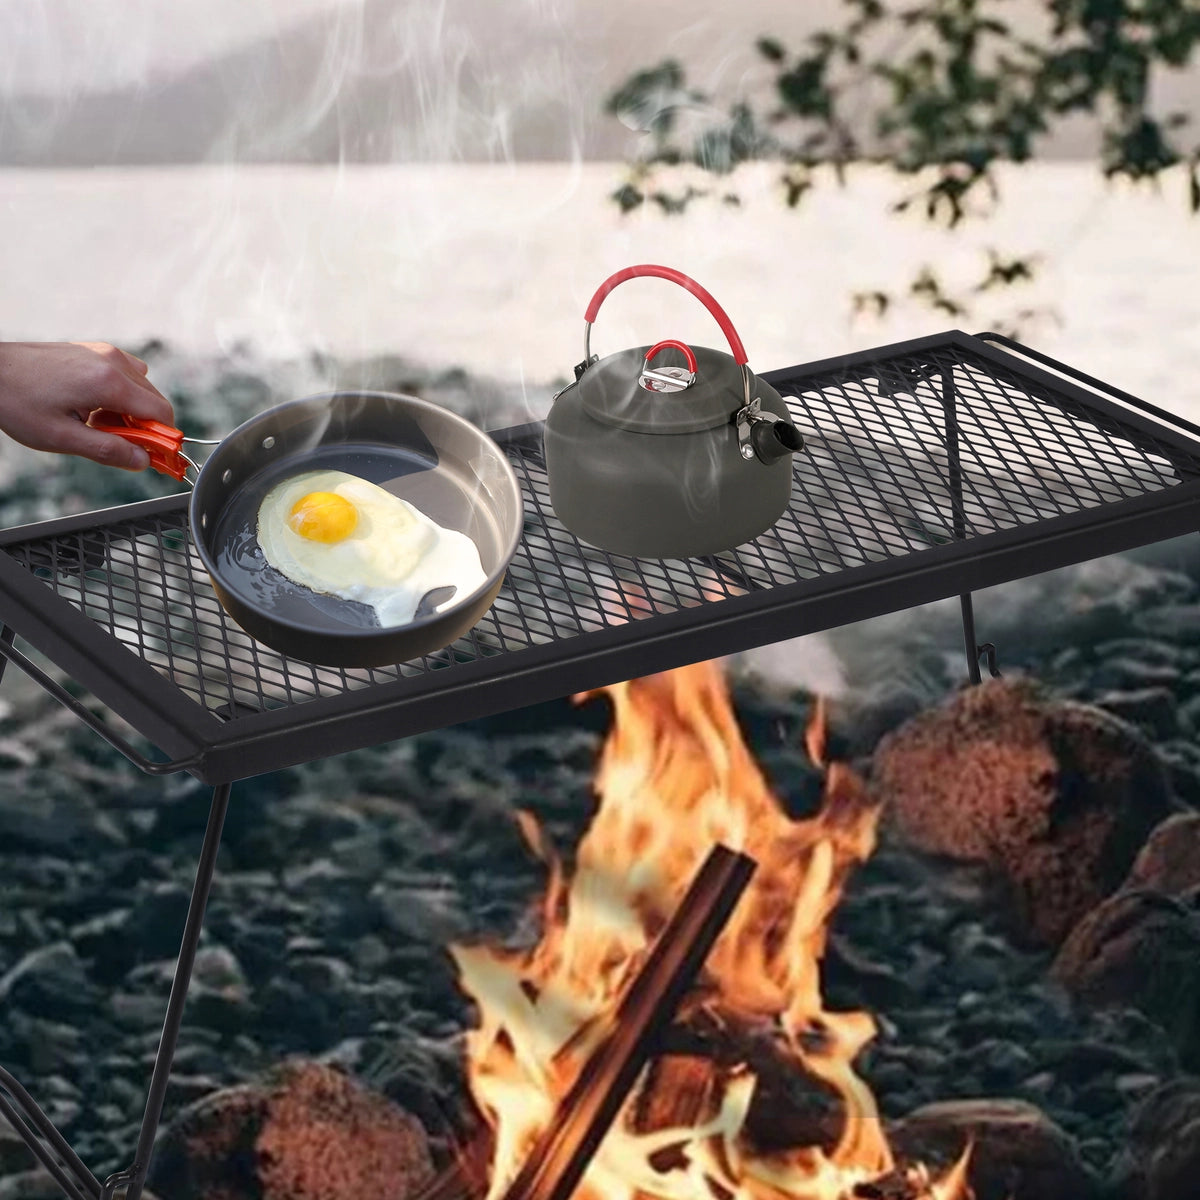 4Pcs Campfire Cooking Grill Stackable Storage Rack